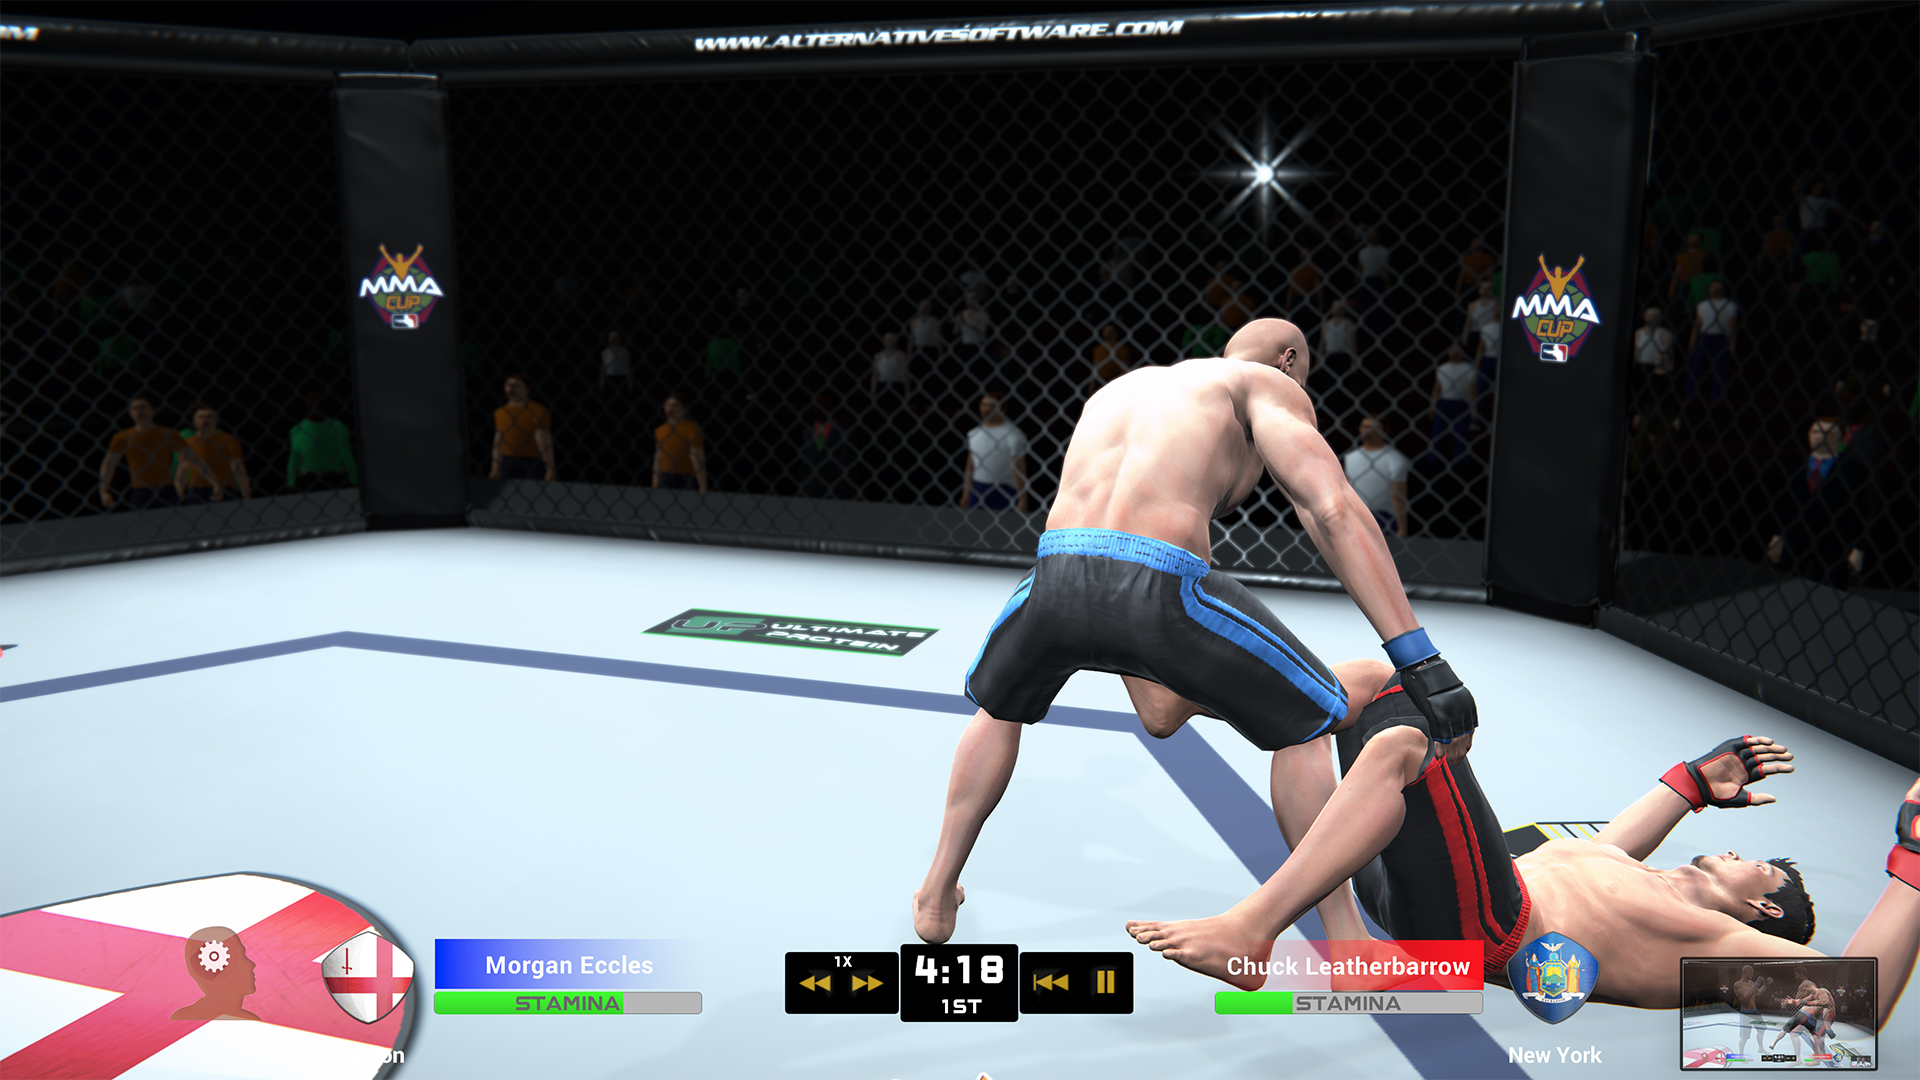 free mma manager game